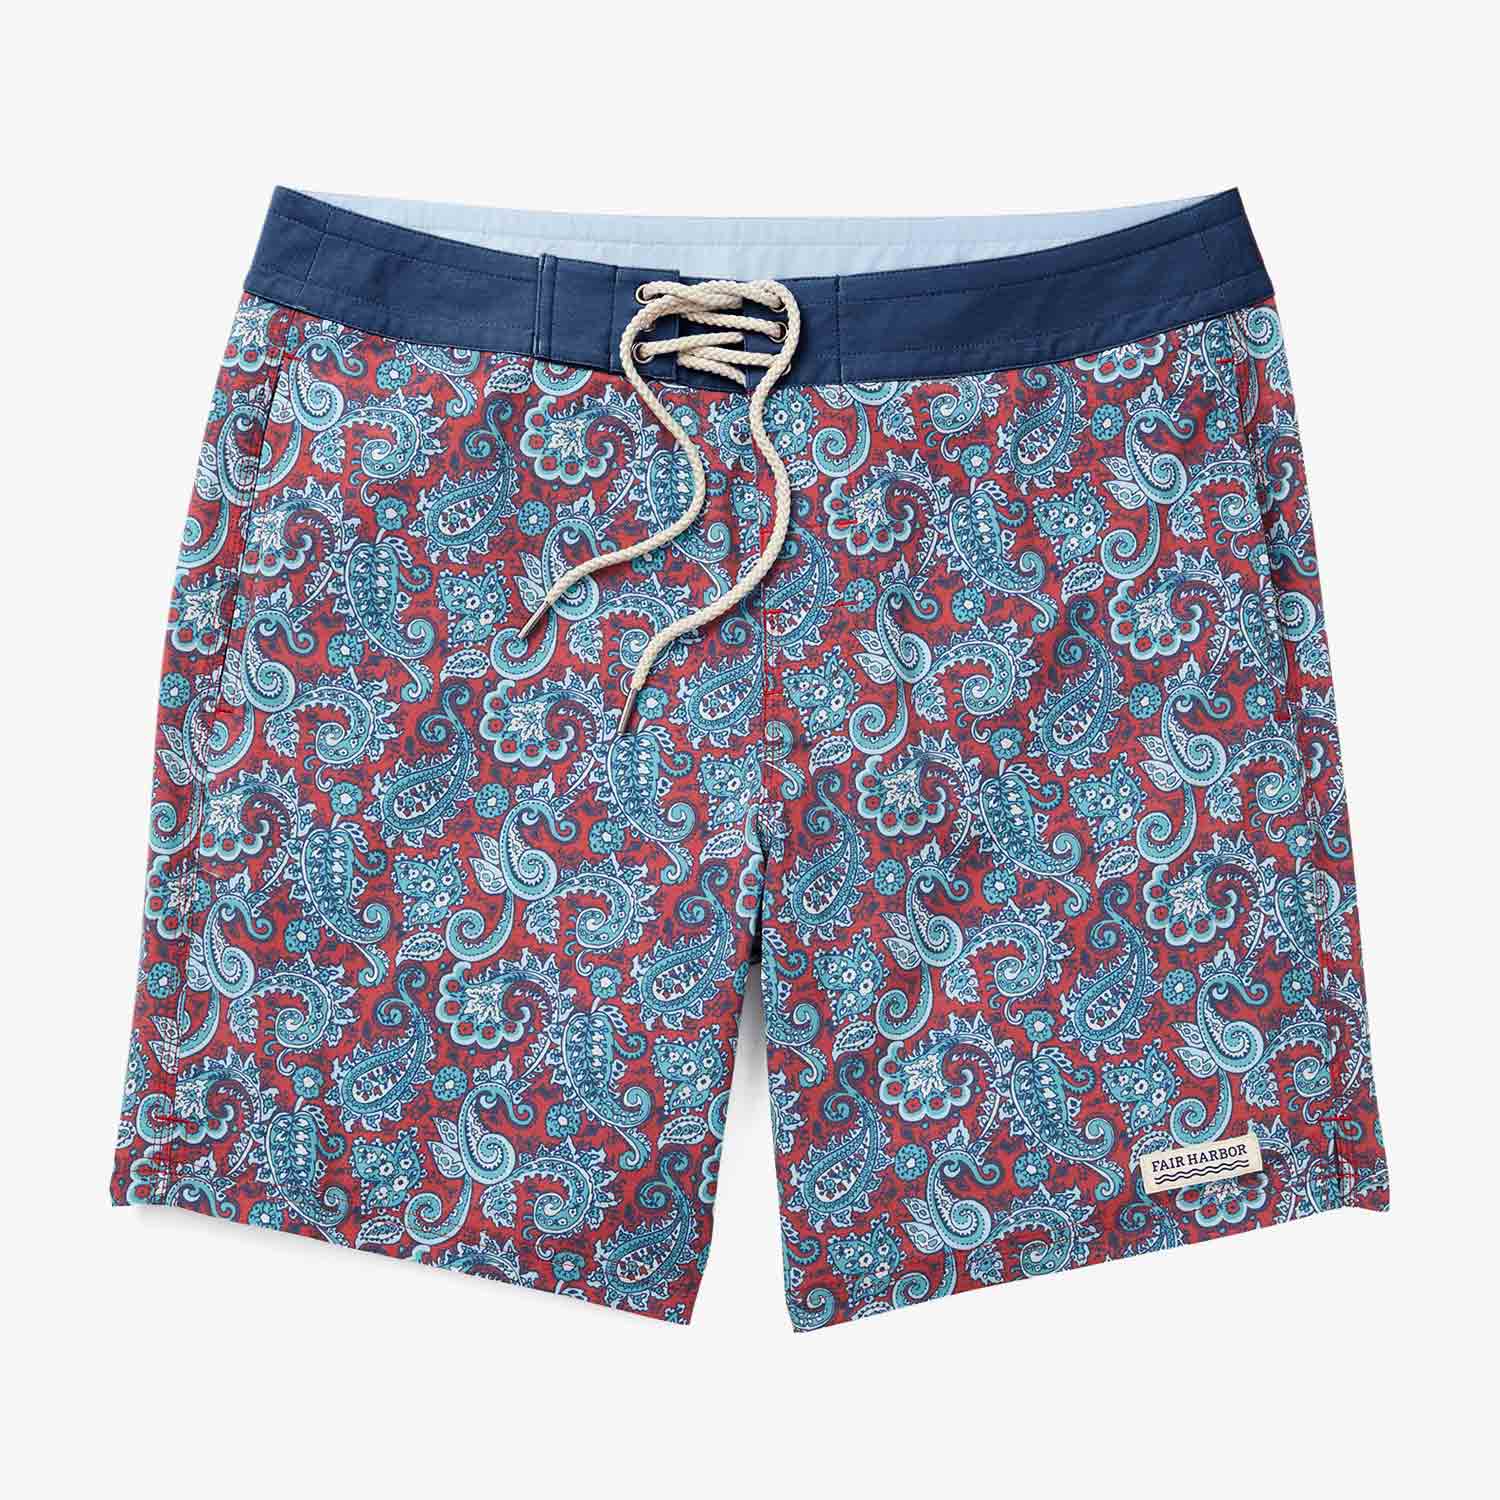 a-place-for-all-your-needs-to-buy-the-nautilus-boardshort-red-paisley-sale_0.jpg